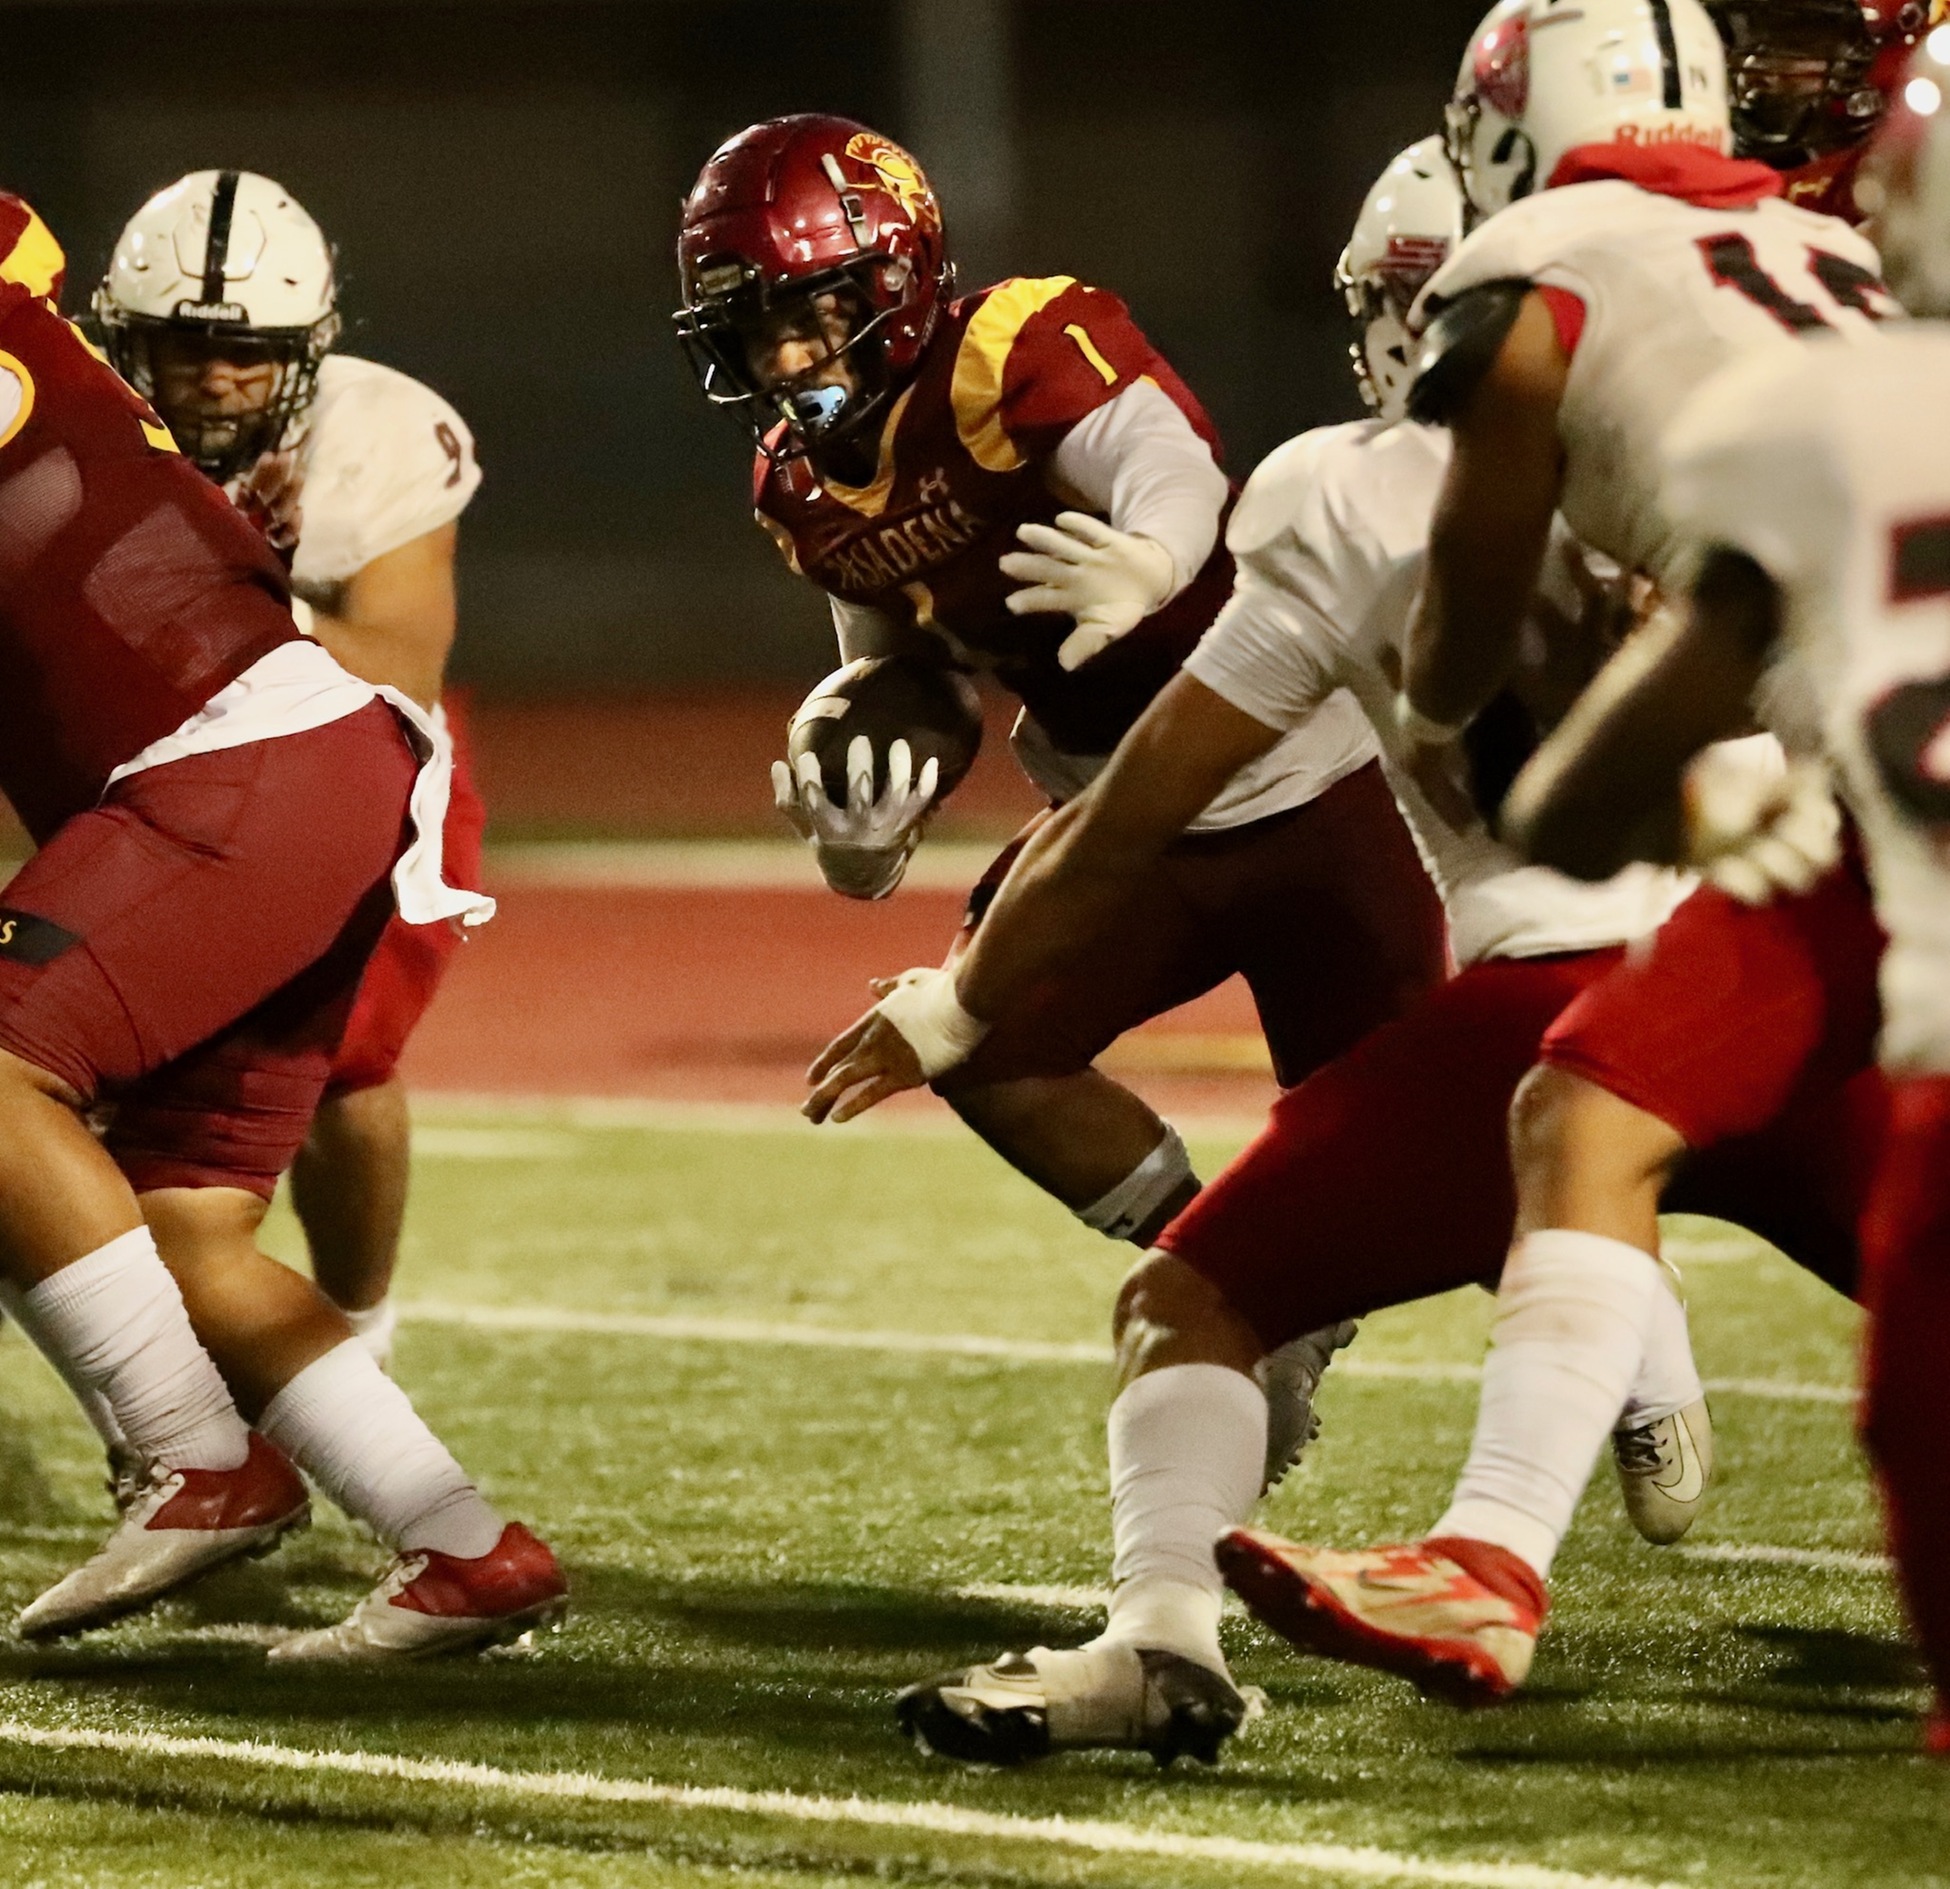 Isaac Glover carries the ball during PCC's win over Santa Ana on Saturday night (photo by Michael Watkins).